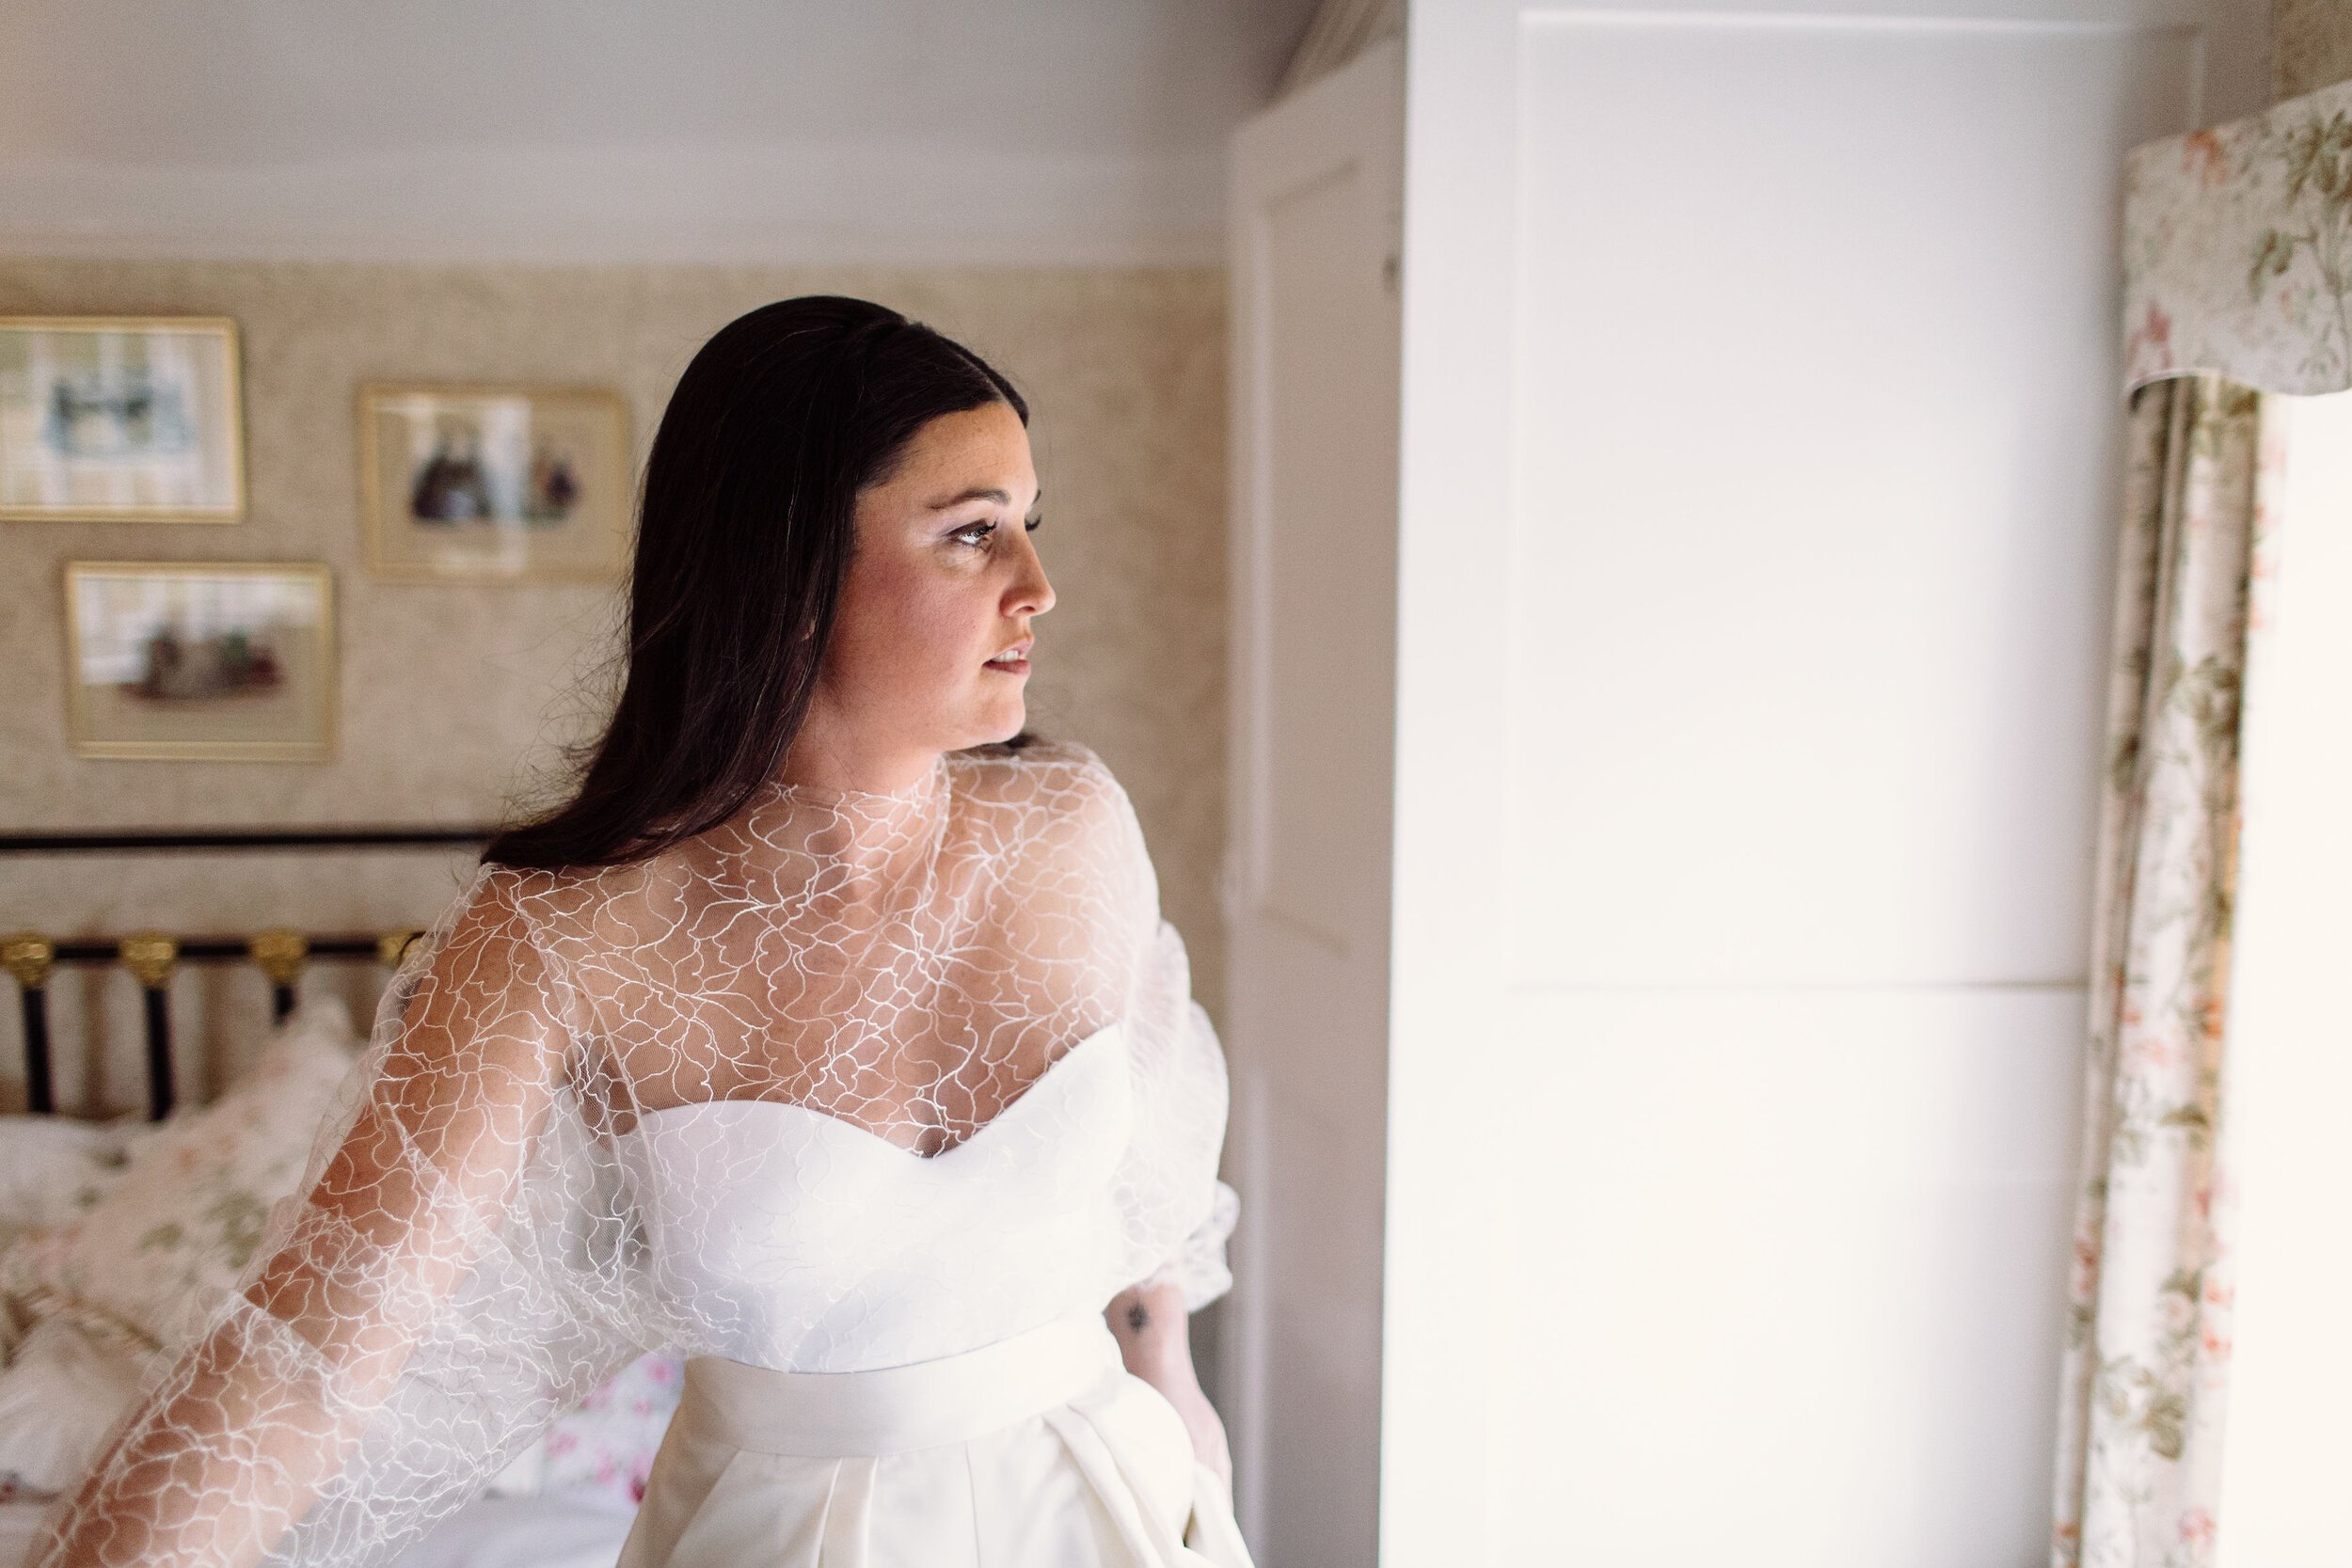 Beautiful bride Megan wore a wedding outfit by Halfpenny London | Image by Hermione McCosh